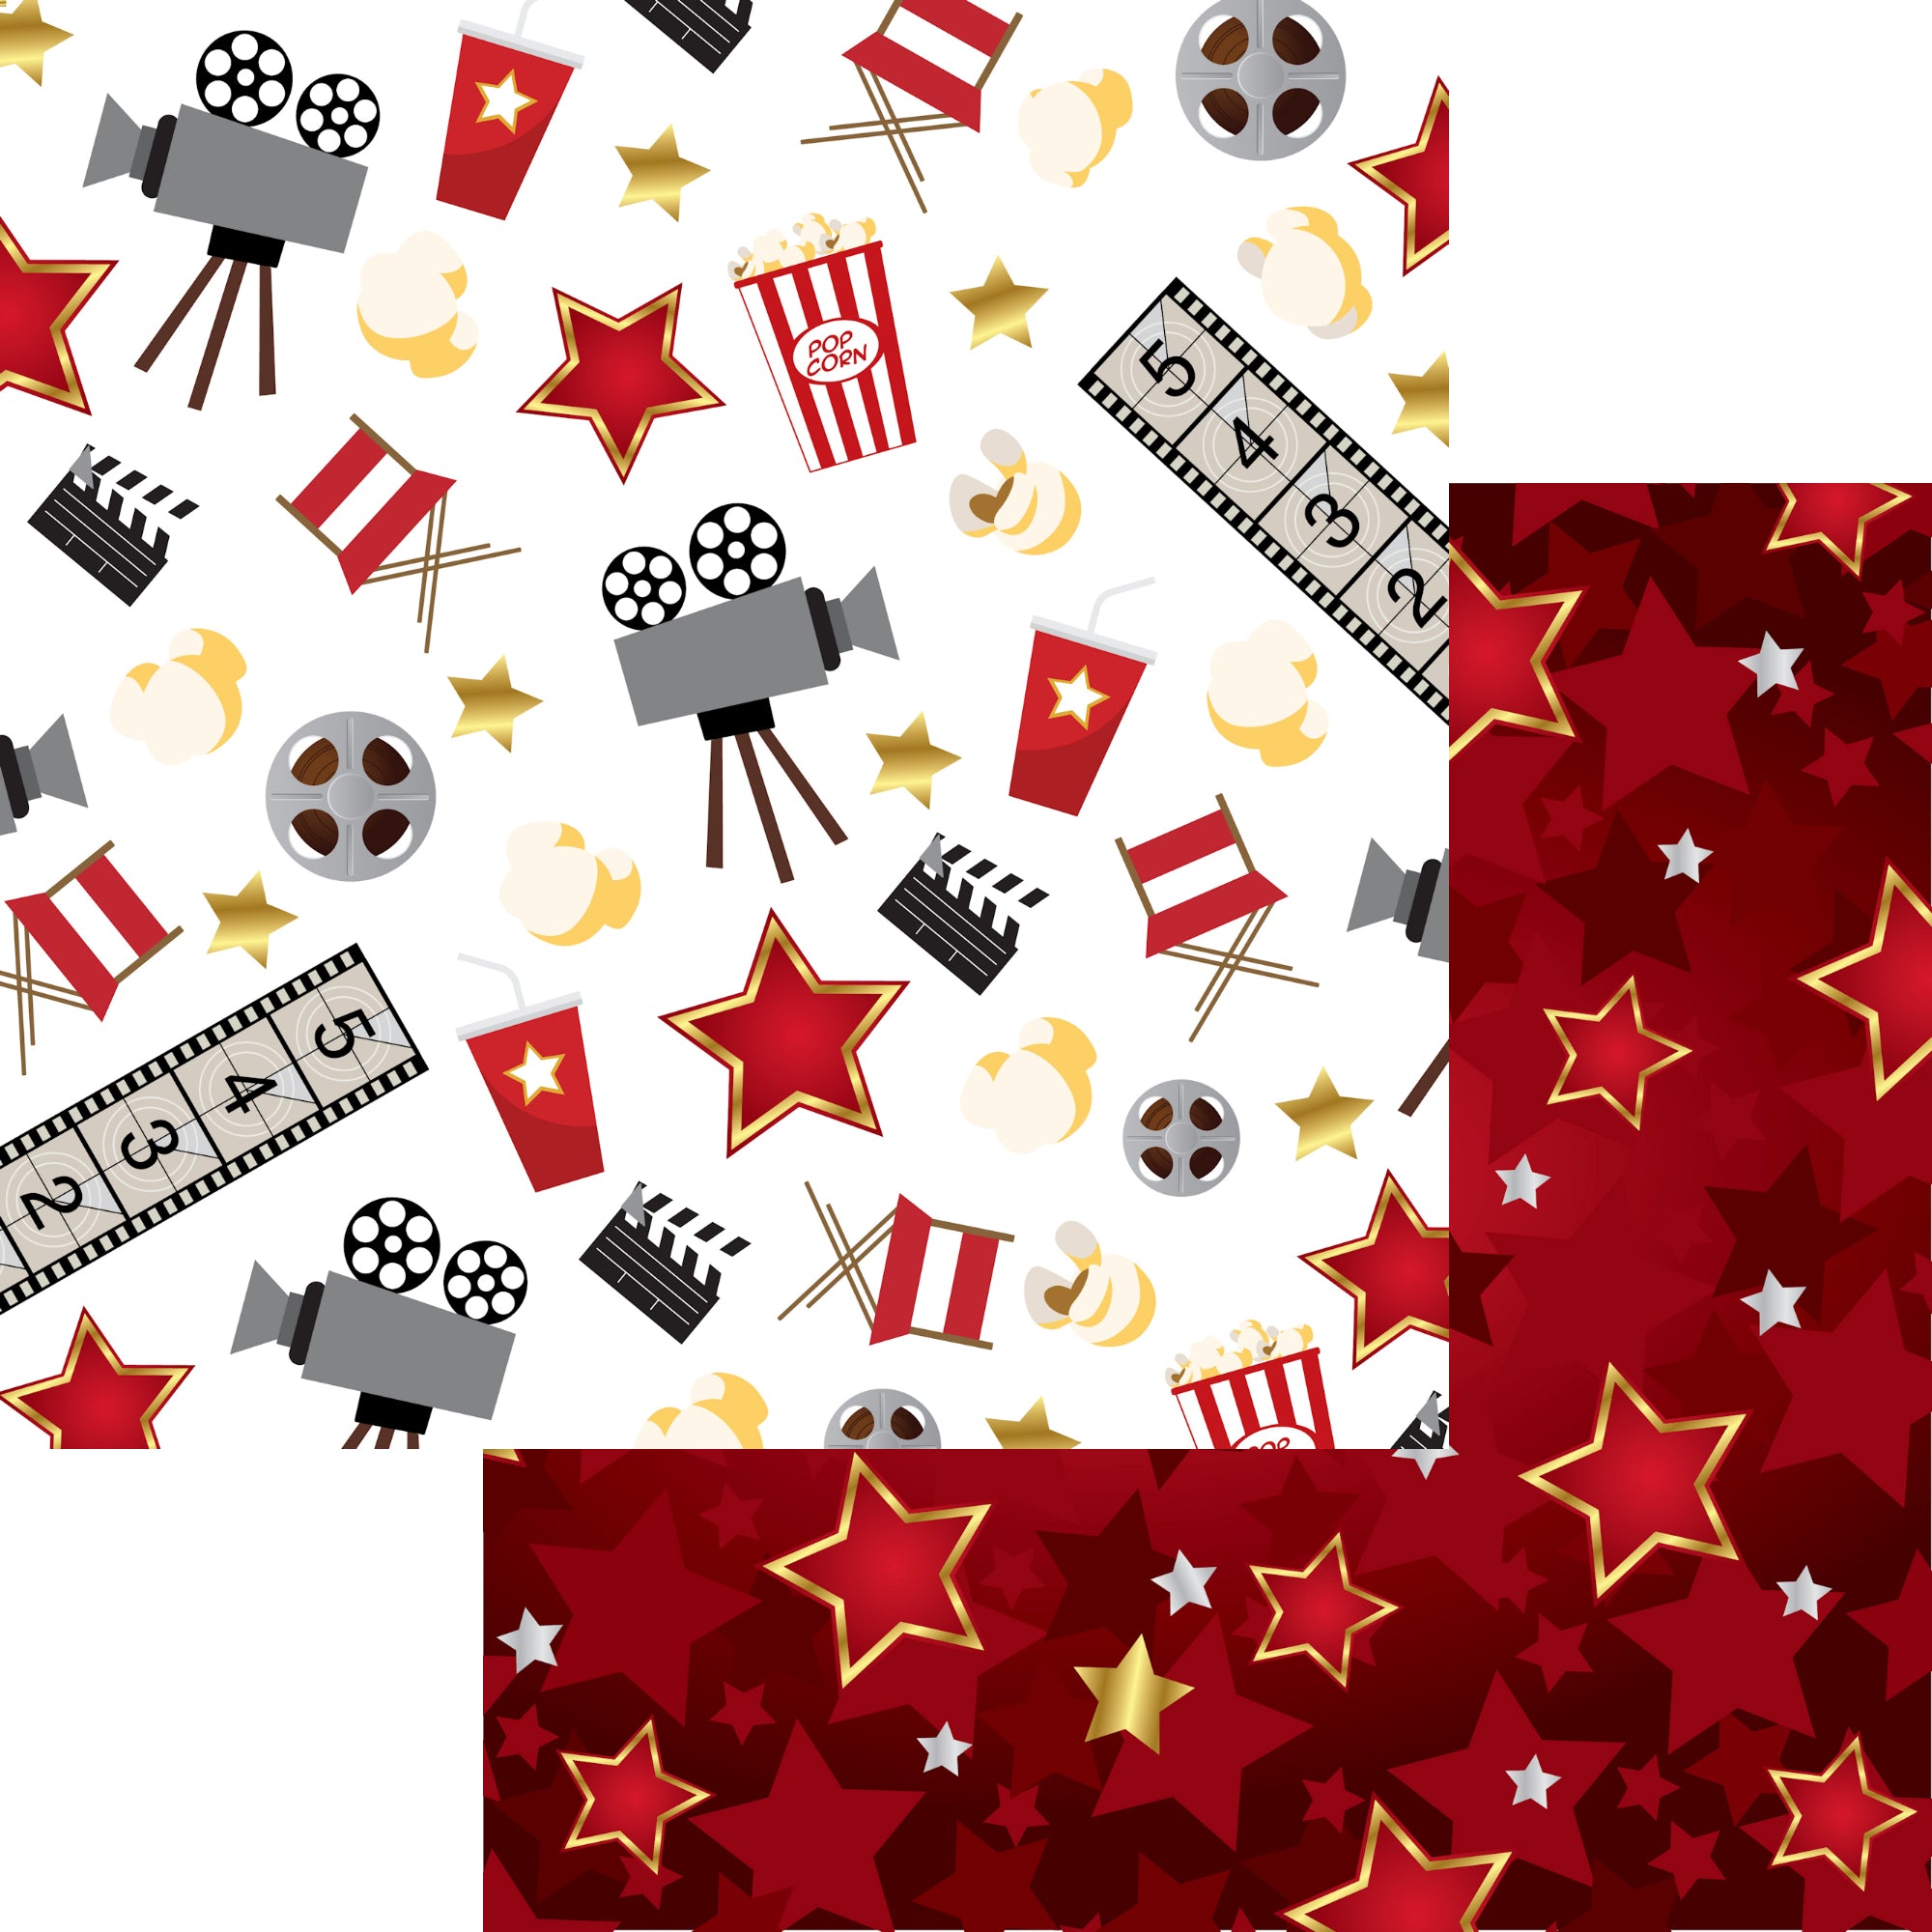 Movie Time 12 x 12 Scrapbook Paper & Embellishment Kit by SSC Designs